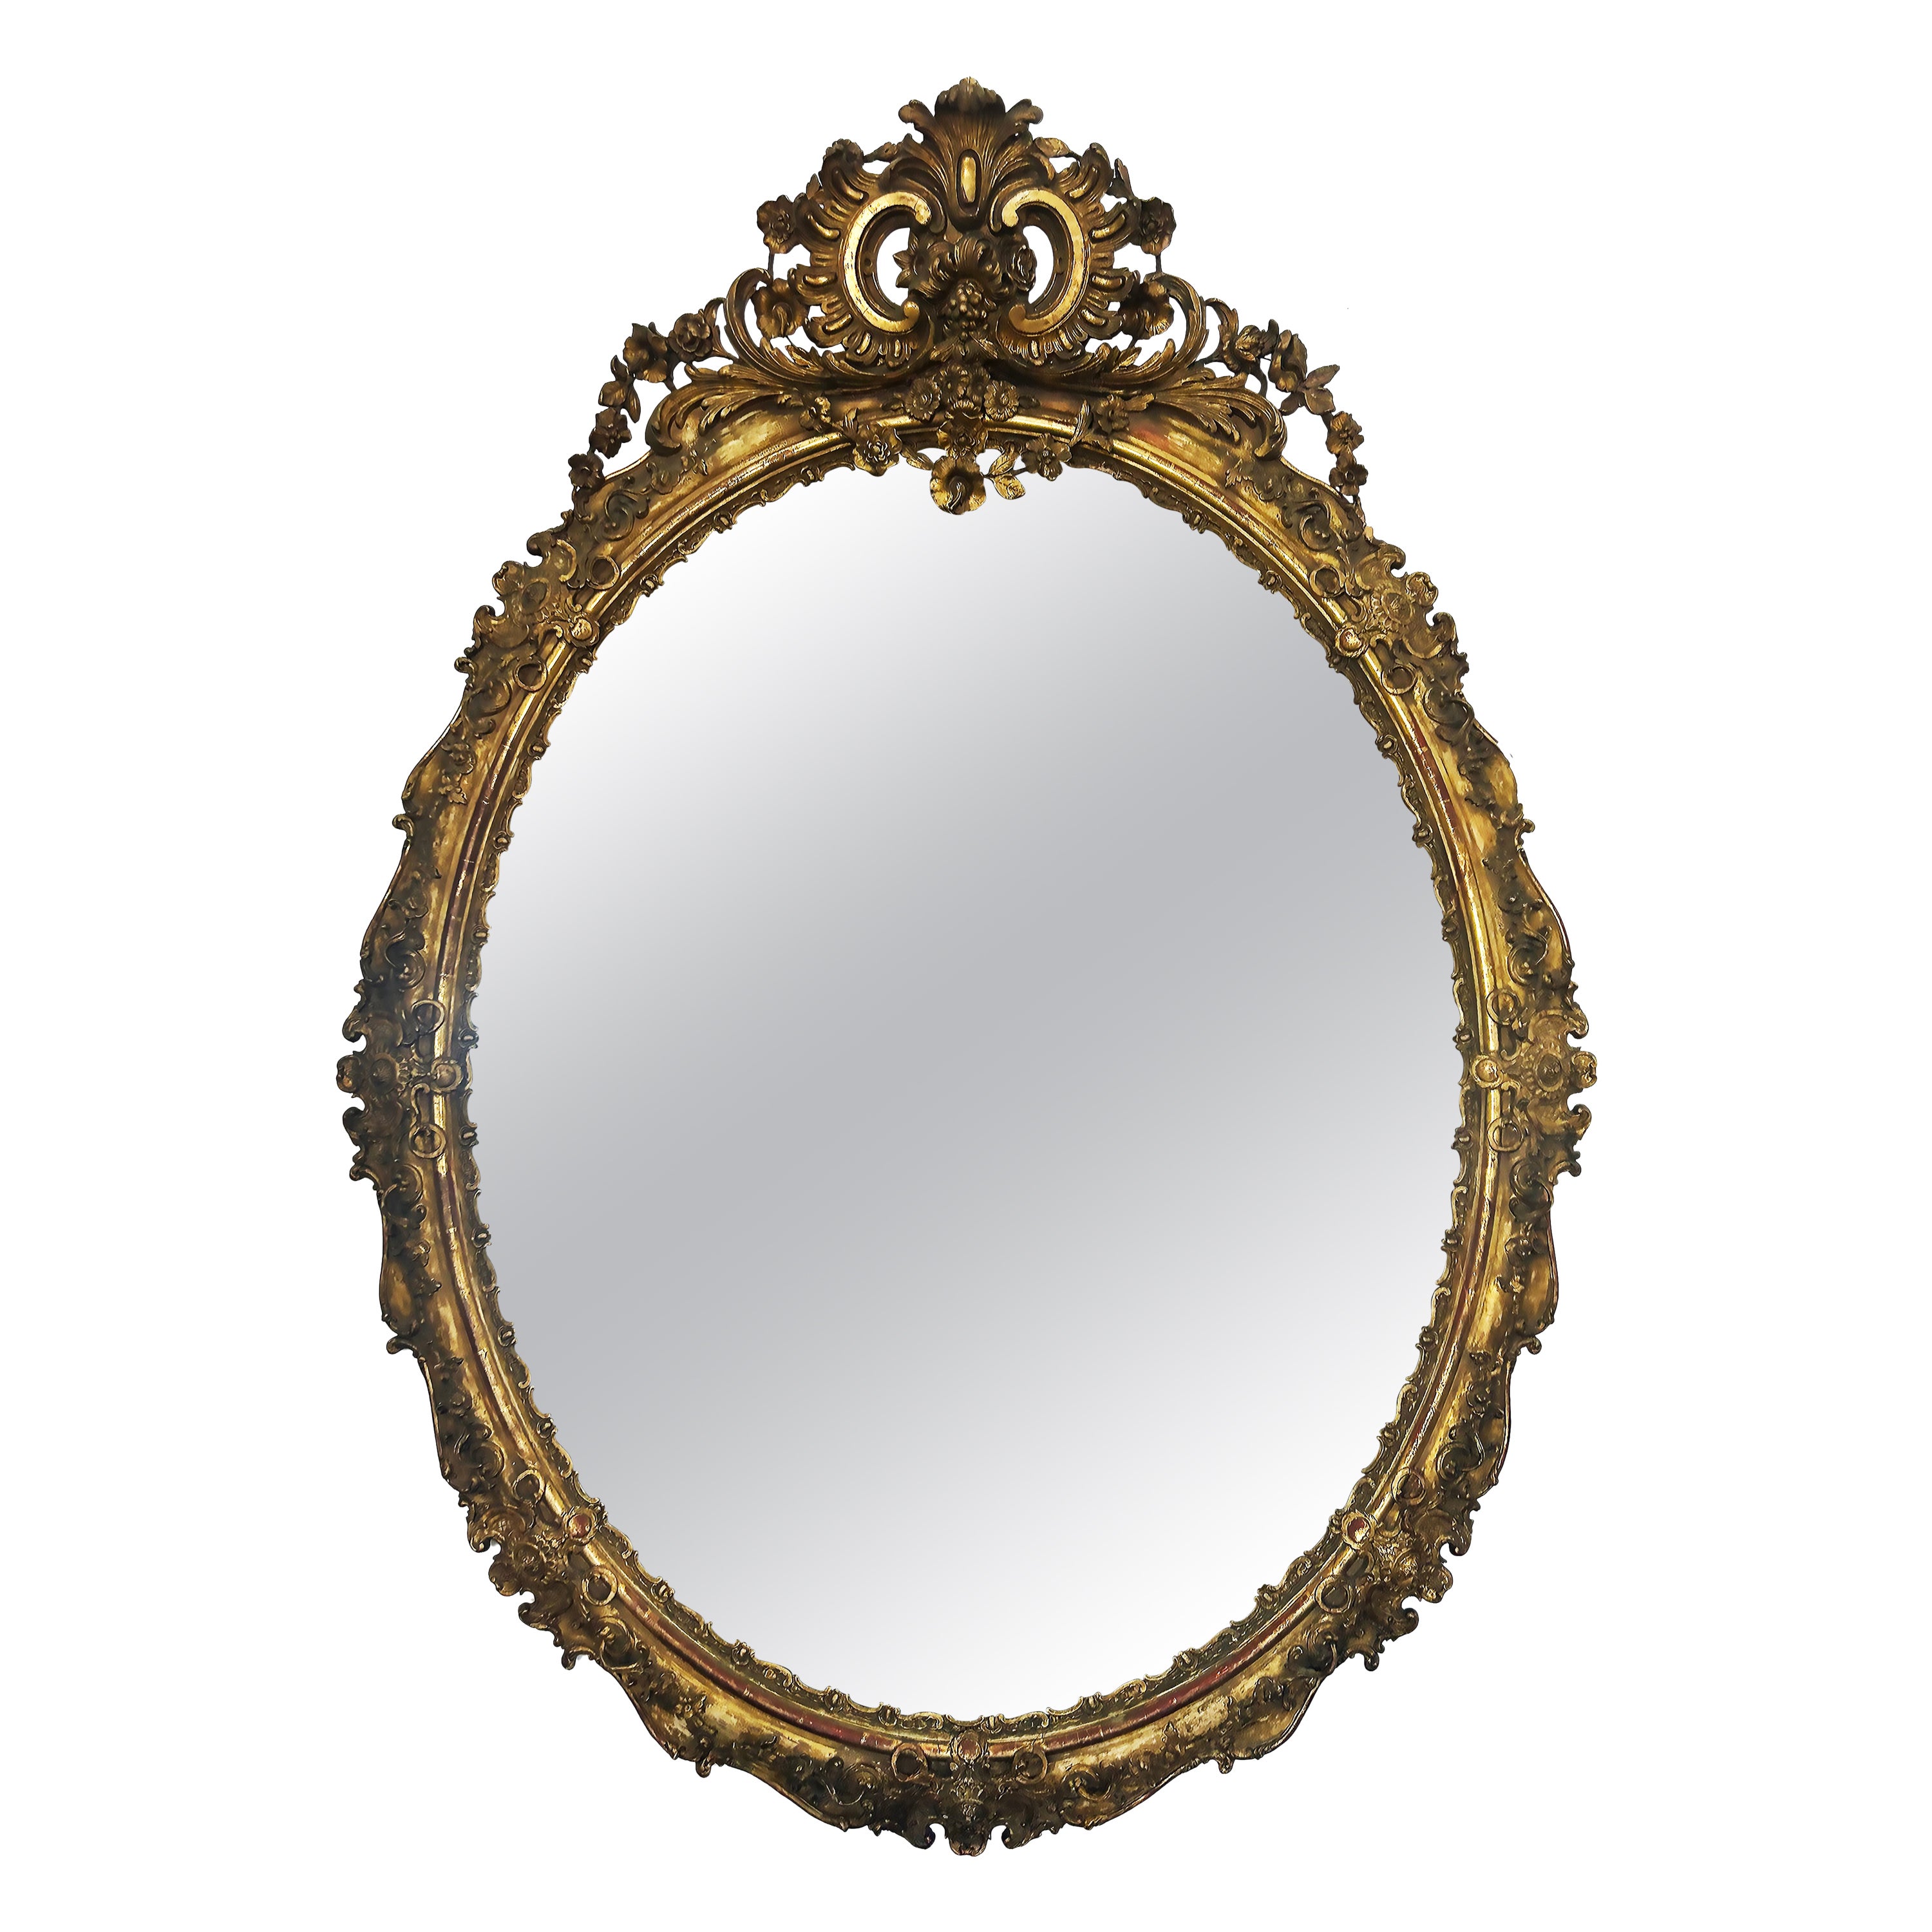 Monumental European Oval Giltwood Gesso Mirror, Late 19th-Early 20th Century